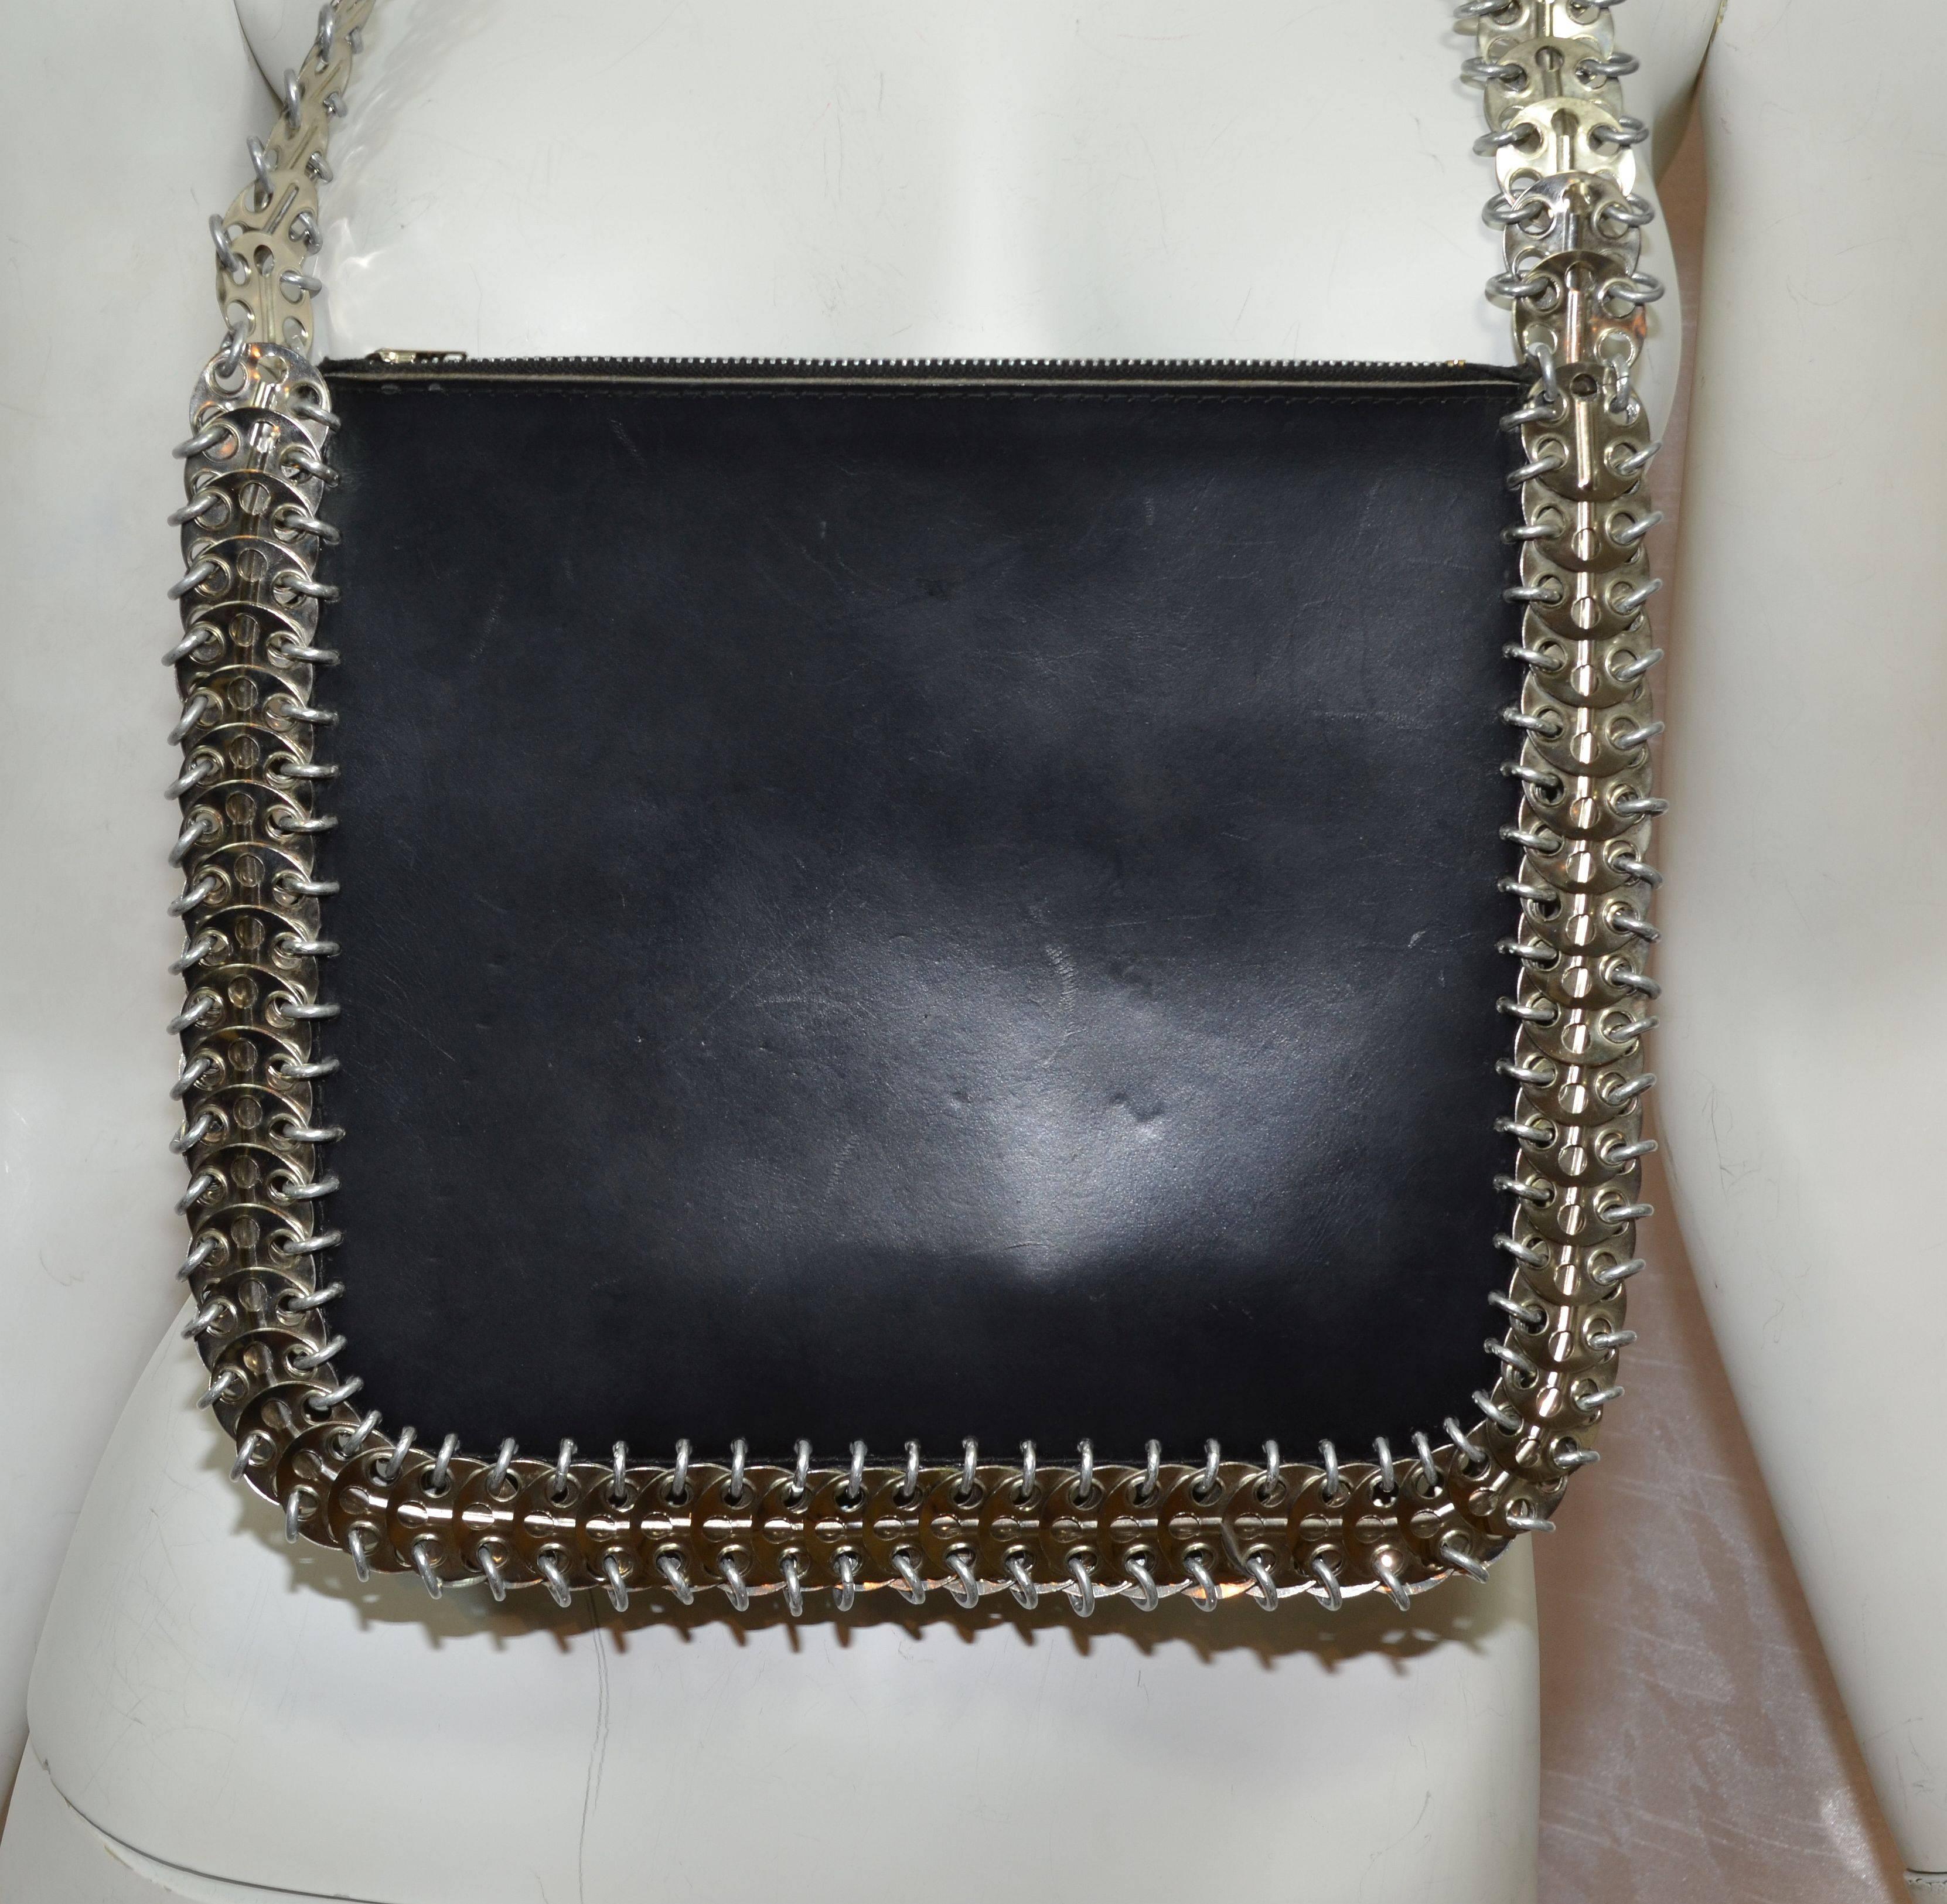 Paco Rabanne shoulder bag in black leather and metal disks. The disks are attached with aluminum links. There are two zippered pockets and an open center compartment. Bag in in excellent condition with minor wears to the leather. Measurements are: